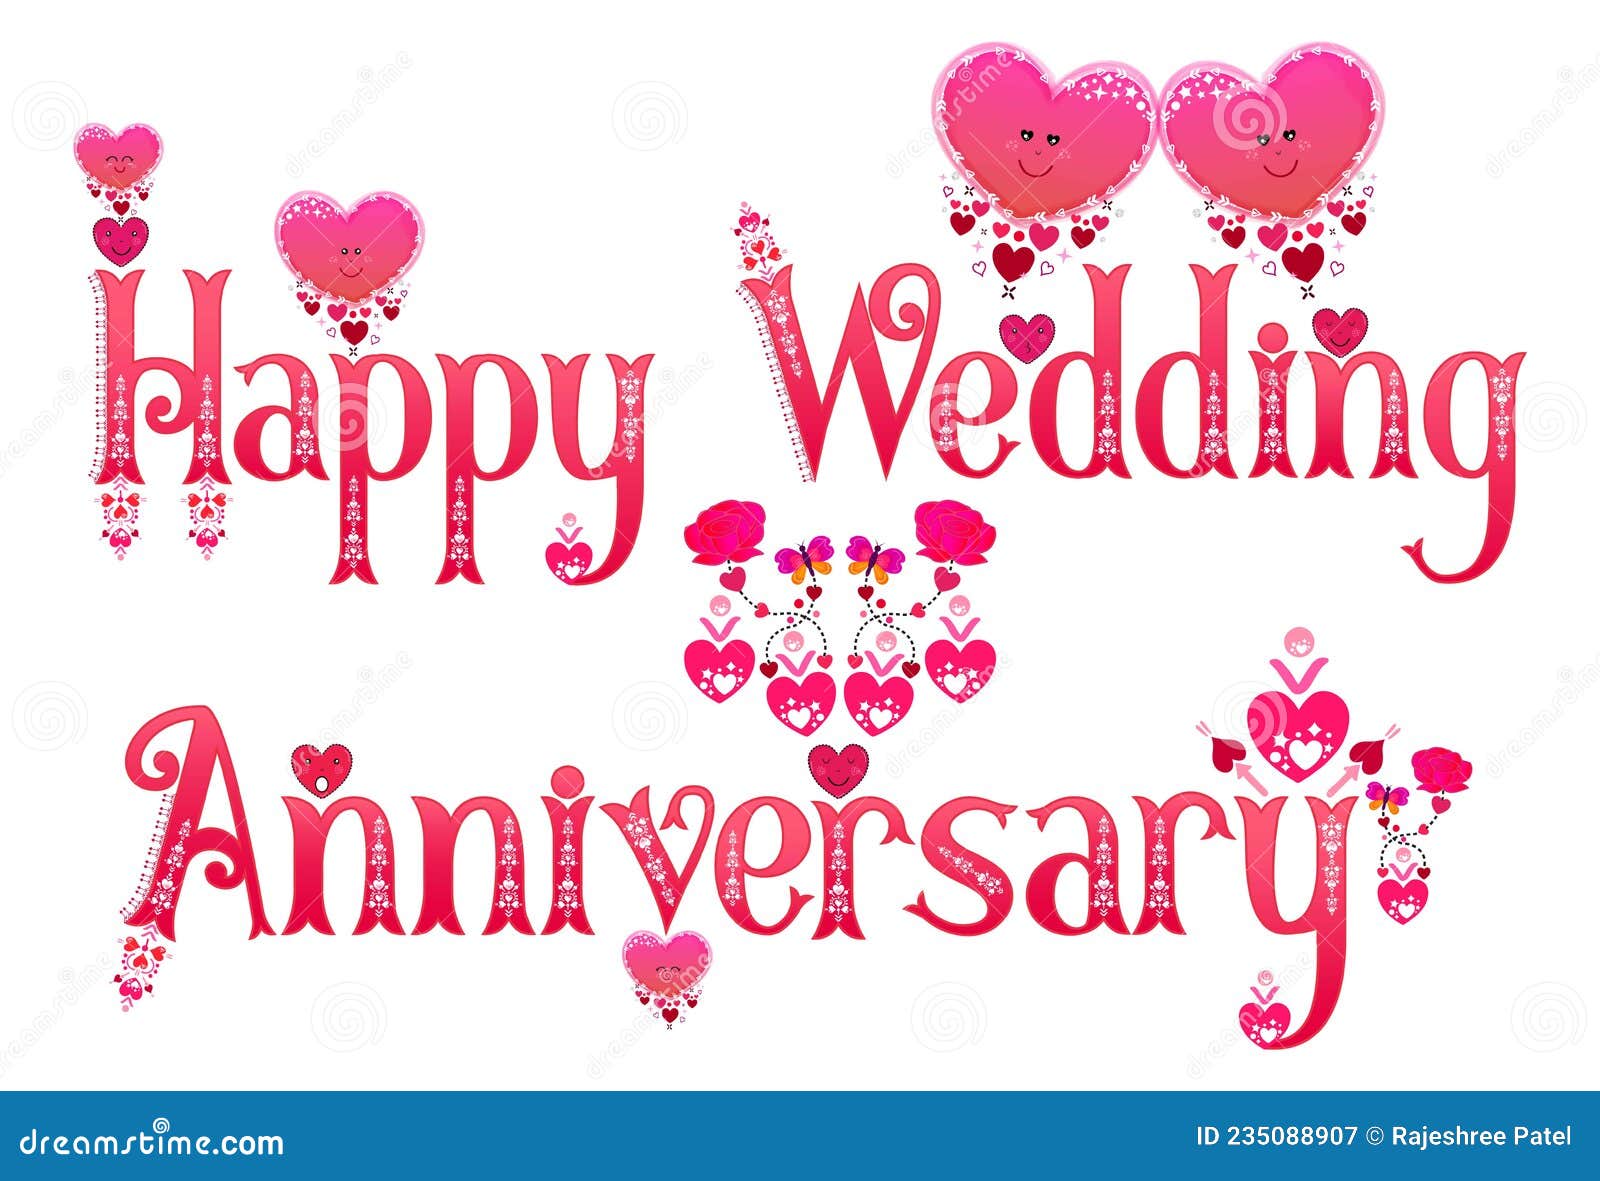 The Ultimate Collection Of Over 999 Happy Wedding Anniversary Images In